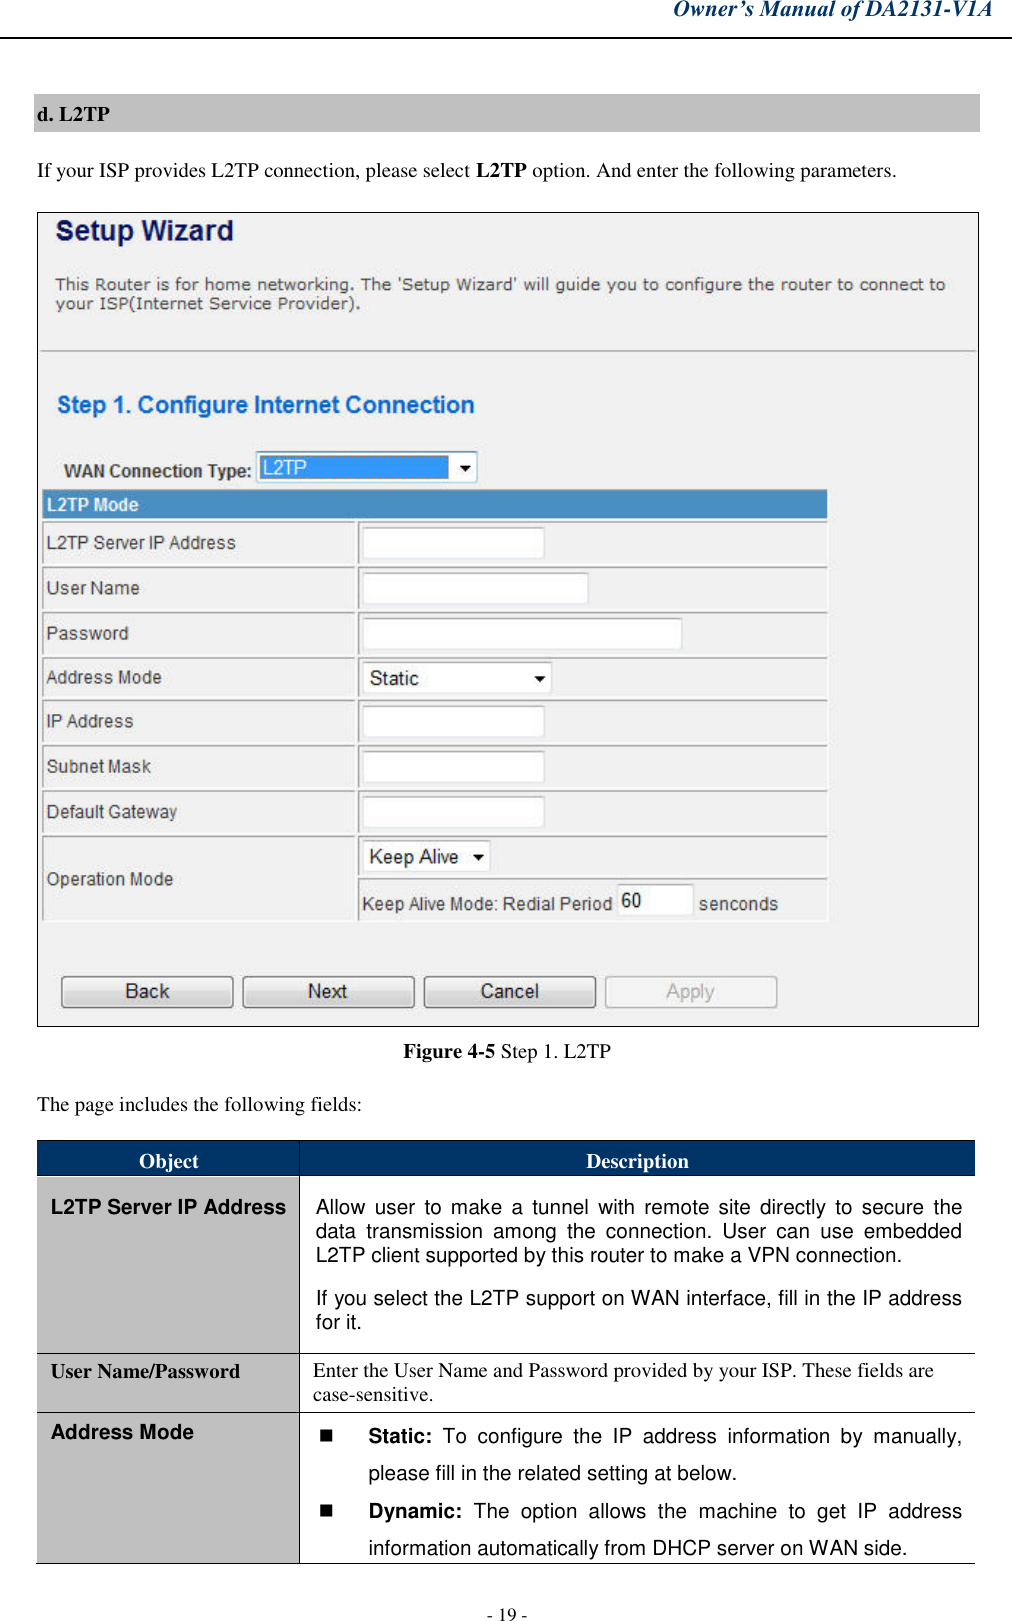 Owner’s Manual of DA2131-V1A - 19 - d. L2TPIf your ISP provides L2TP connection, please select L2TP option. And enter the following parameters. Figure 4-5 Step 1. L2TP The page includes the following fields: Object Description L2TP Server IP Address Allow  user  to  make  a  tunnel  with  remote  site  directly  to  secure  the data  transmission  among  the  connection.  User  can  use  embedded L2TP client supported by this router to make a VPN connection. If you select the L2TP support on WAN interface, fill in the IP address for it. User Name/Password Enter the User Name and Password provided by your ISP. These fields are case-sensitive. Address Mode Static:  To  configure  the  IP  address  information  by  manually,please fill in the related setting at below.Dynamic:  The  option  allows  the  machine  to  get  IP  addressinformation automatically from DHCP server on WAN side.